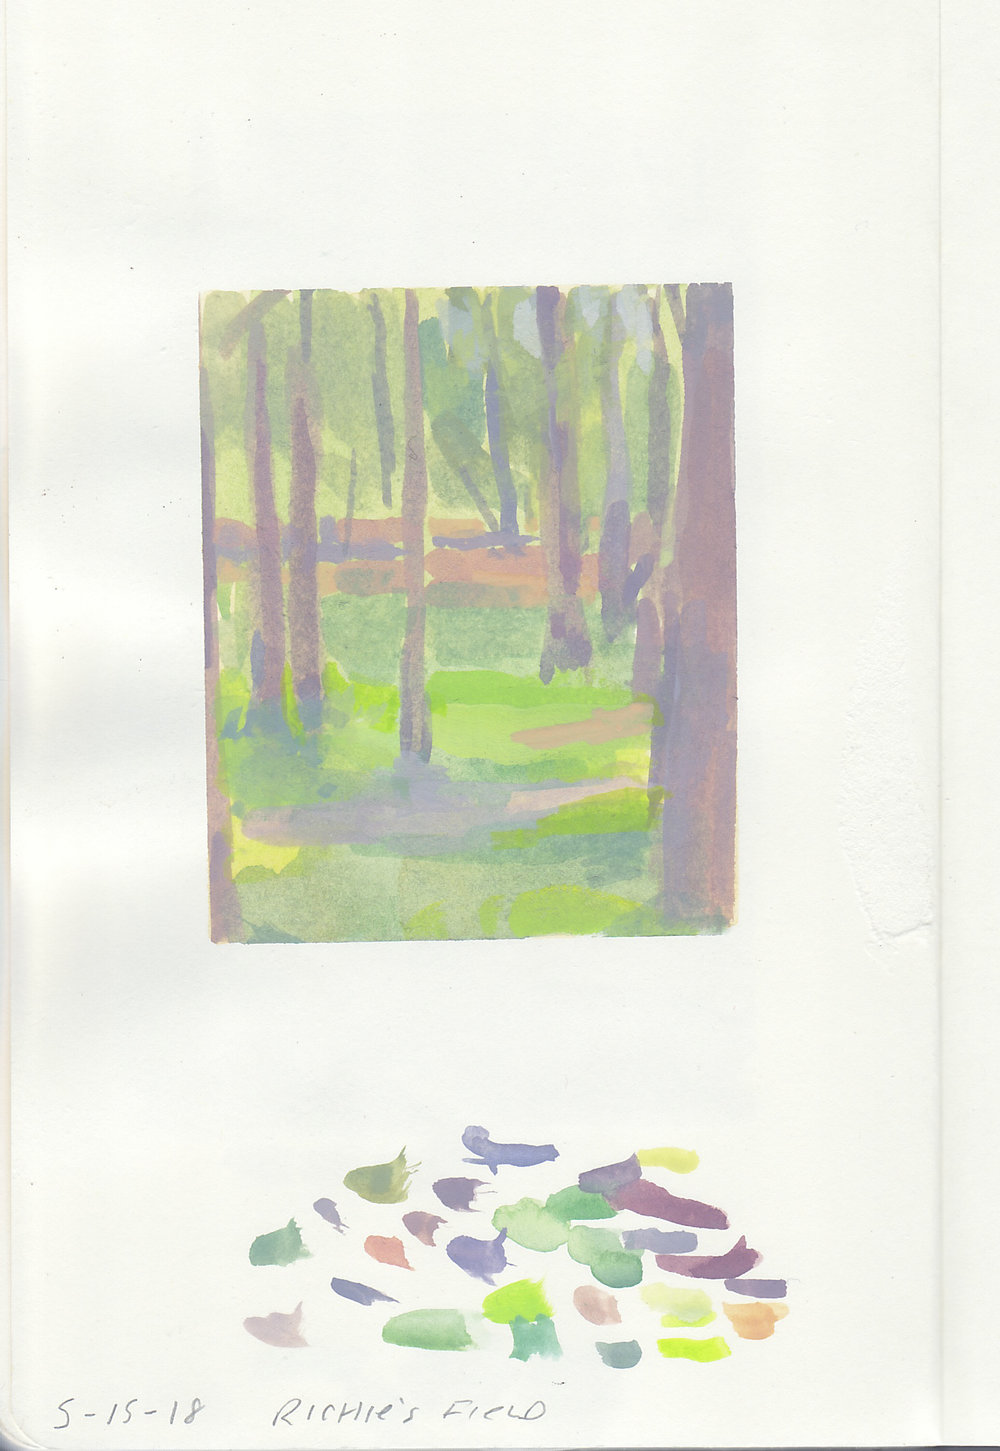  gouache on paper, sketchbook entry 